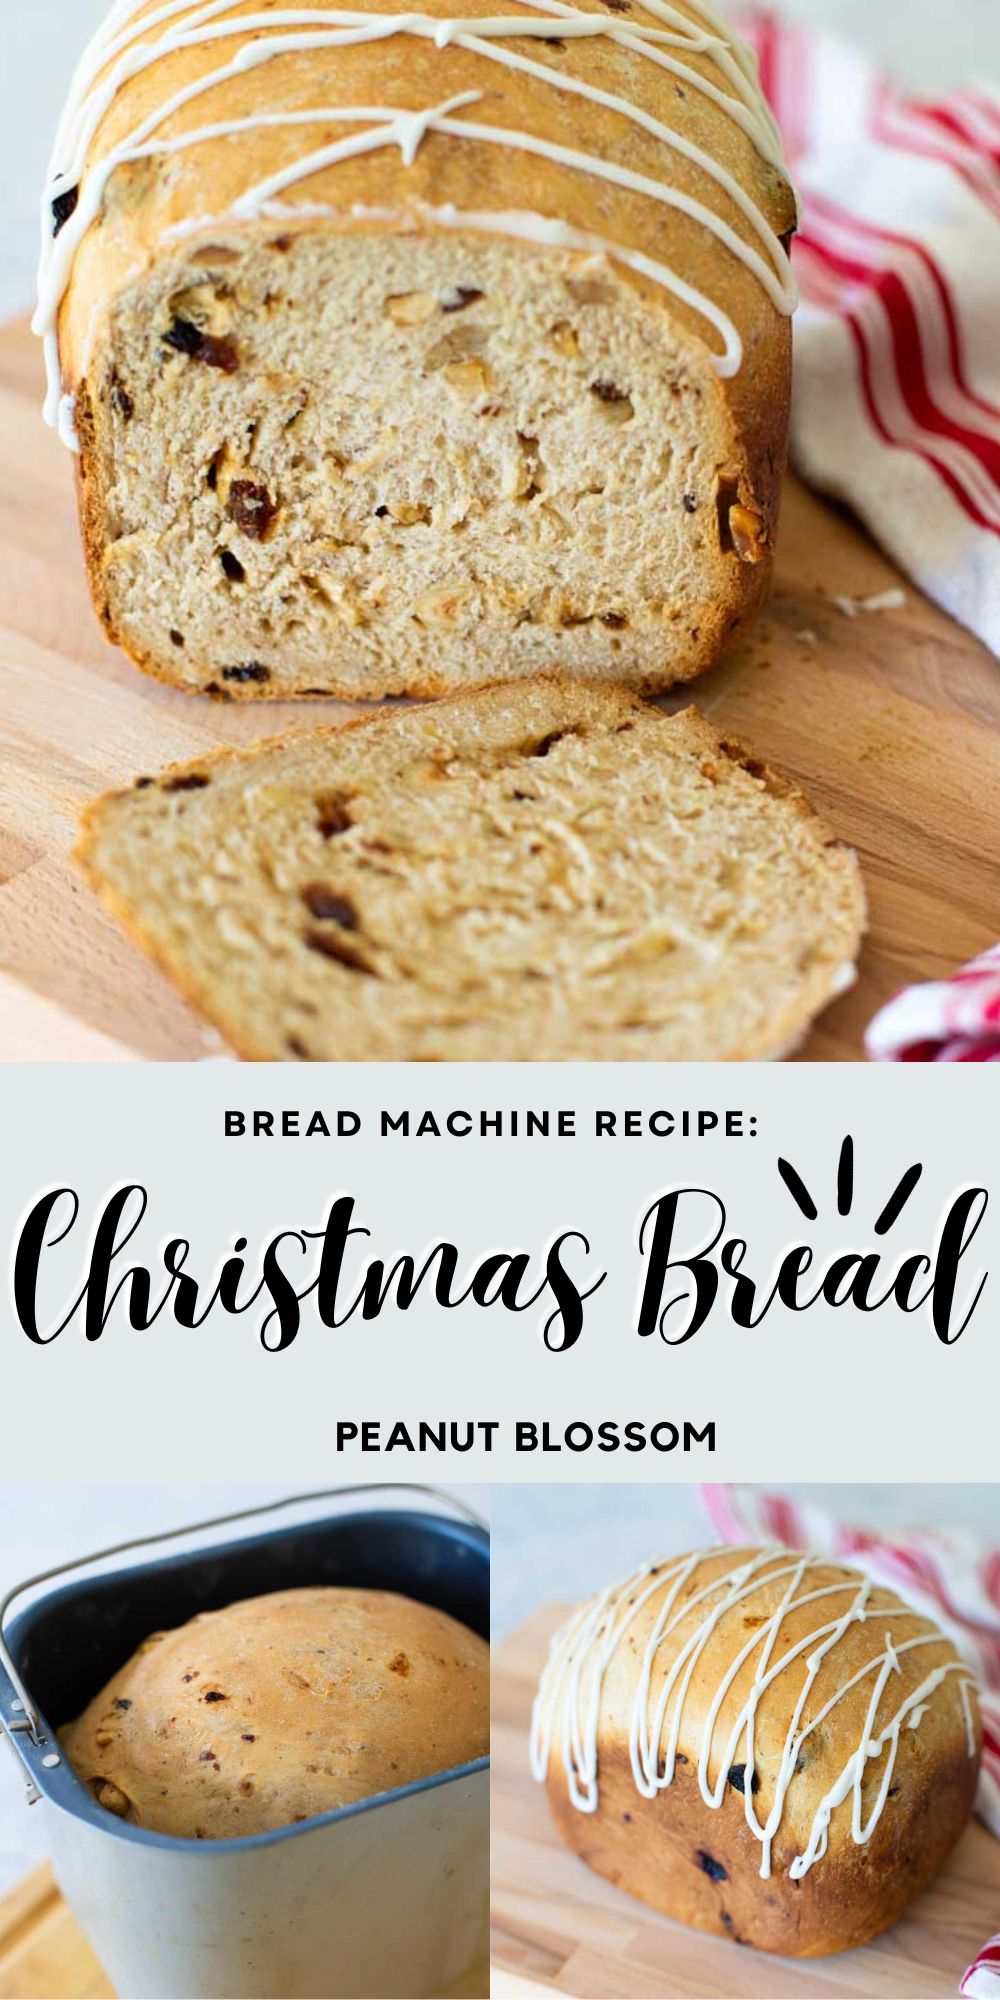 The photo collage shows the German christmas bread sliced so you can see the dried fruits and nuts next to a photo of it in the bread maker pan and a photo of the icing drizzled on top.